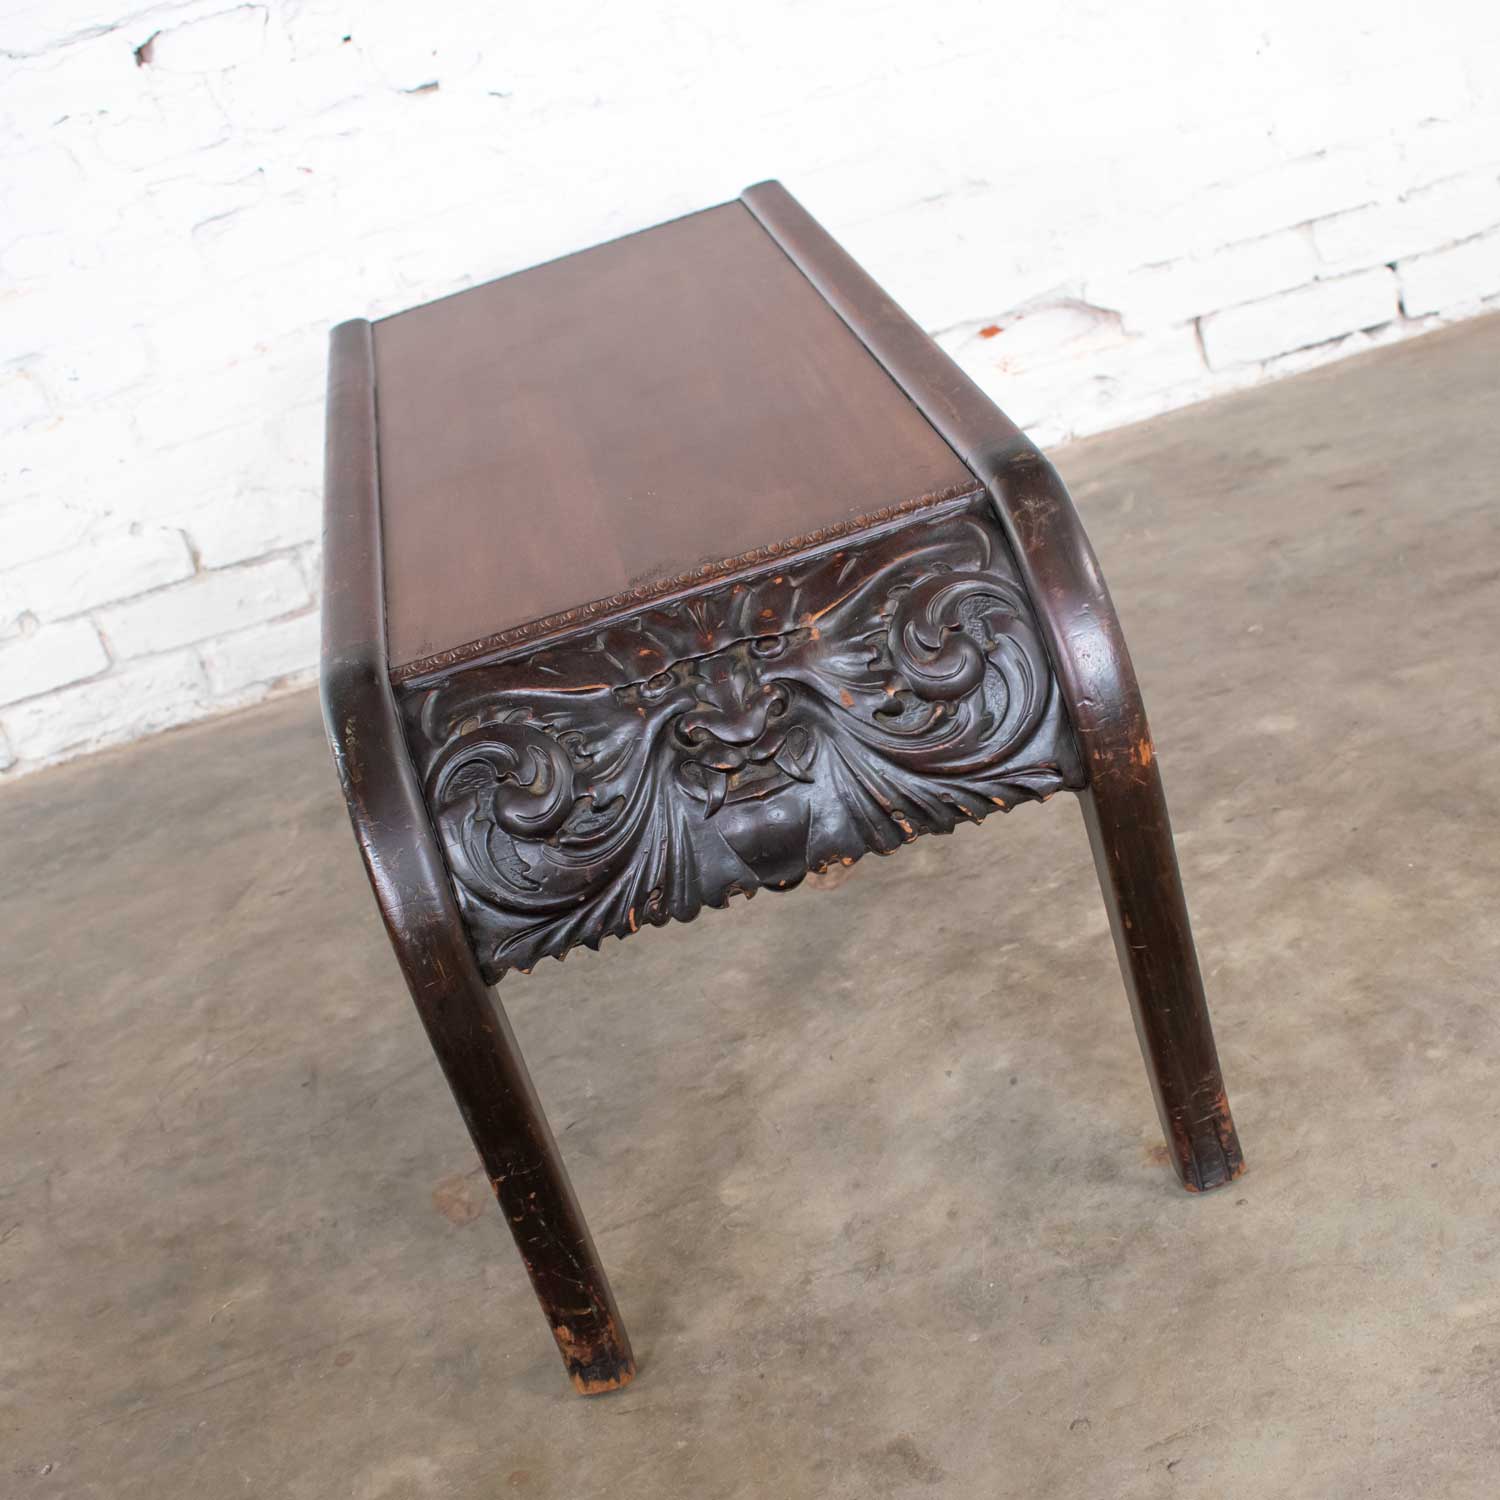 Antique Victorian Bench or Table North Wind Style Hand Carved Mythical Face